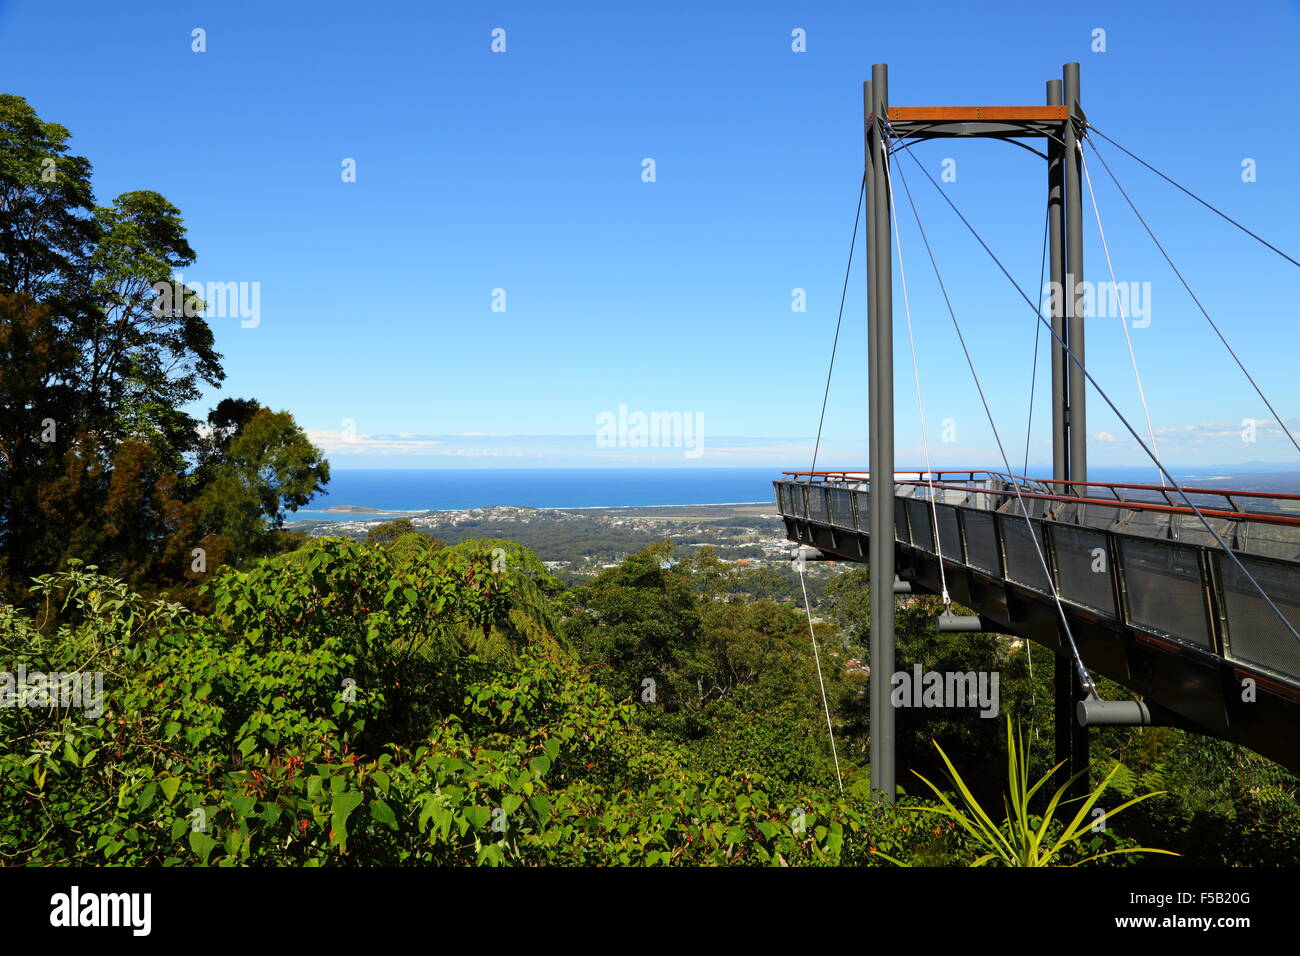 The Forest Sky Pier at Sealy Lookout affords wonderful views over Coffs Harbour and the Pacific Ocean coast in NSW, Australia. Stock Photo